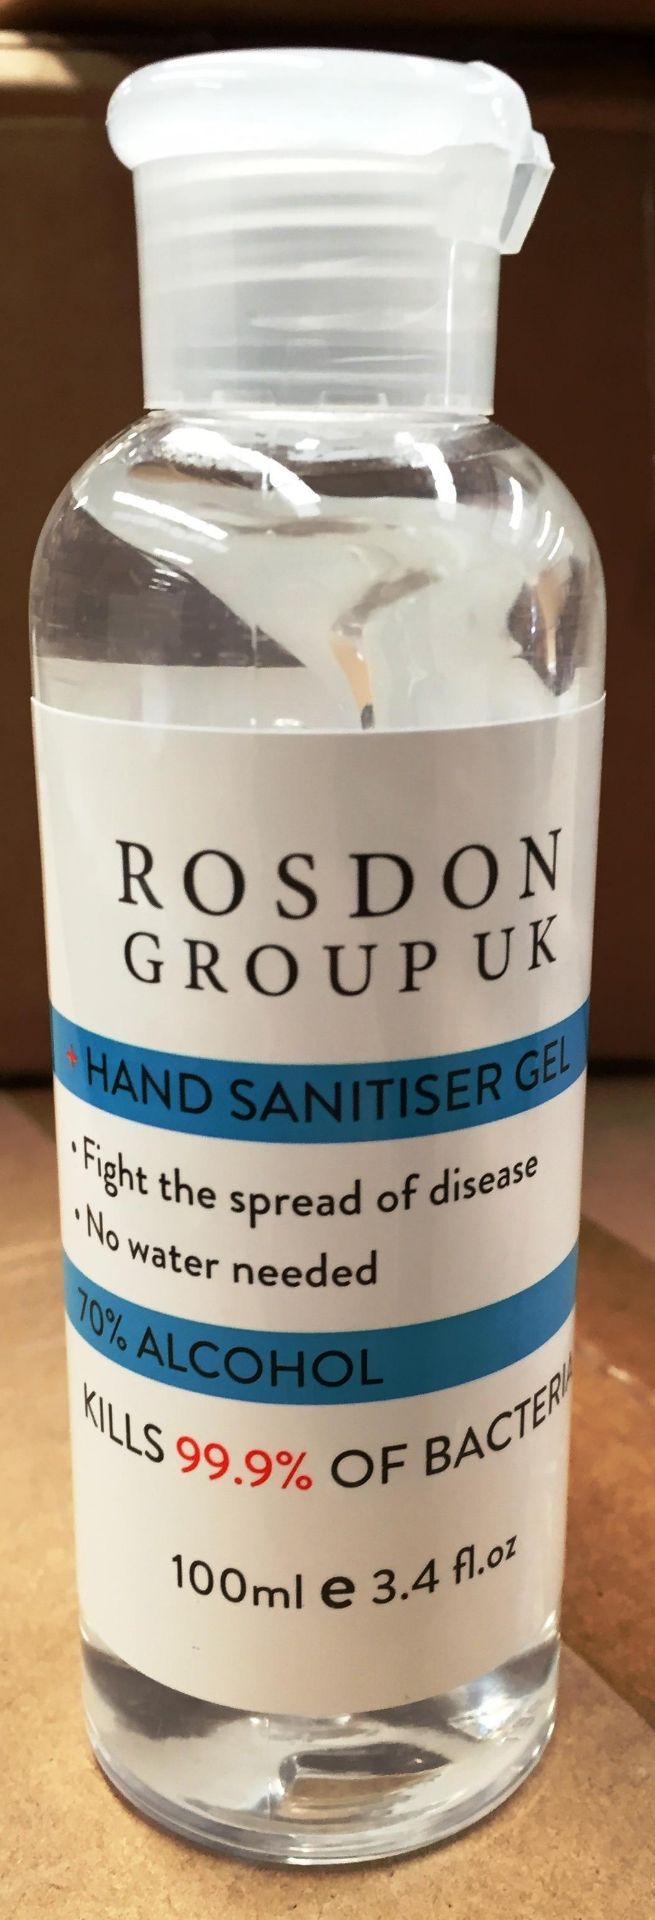 192 x 100ml Rosdon Group Hand Sanitiser Gel (1 outer box) *Please note the final purchase price is